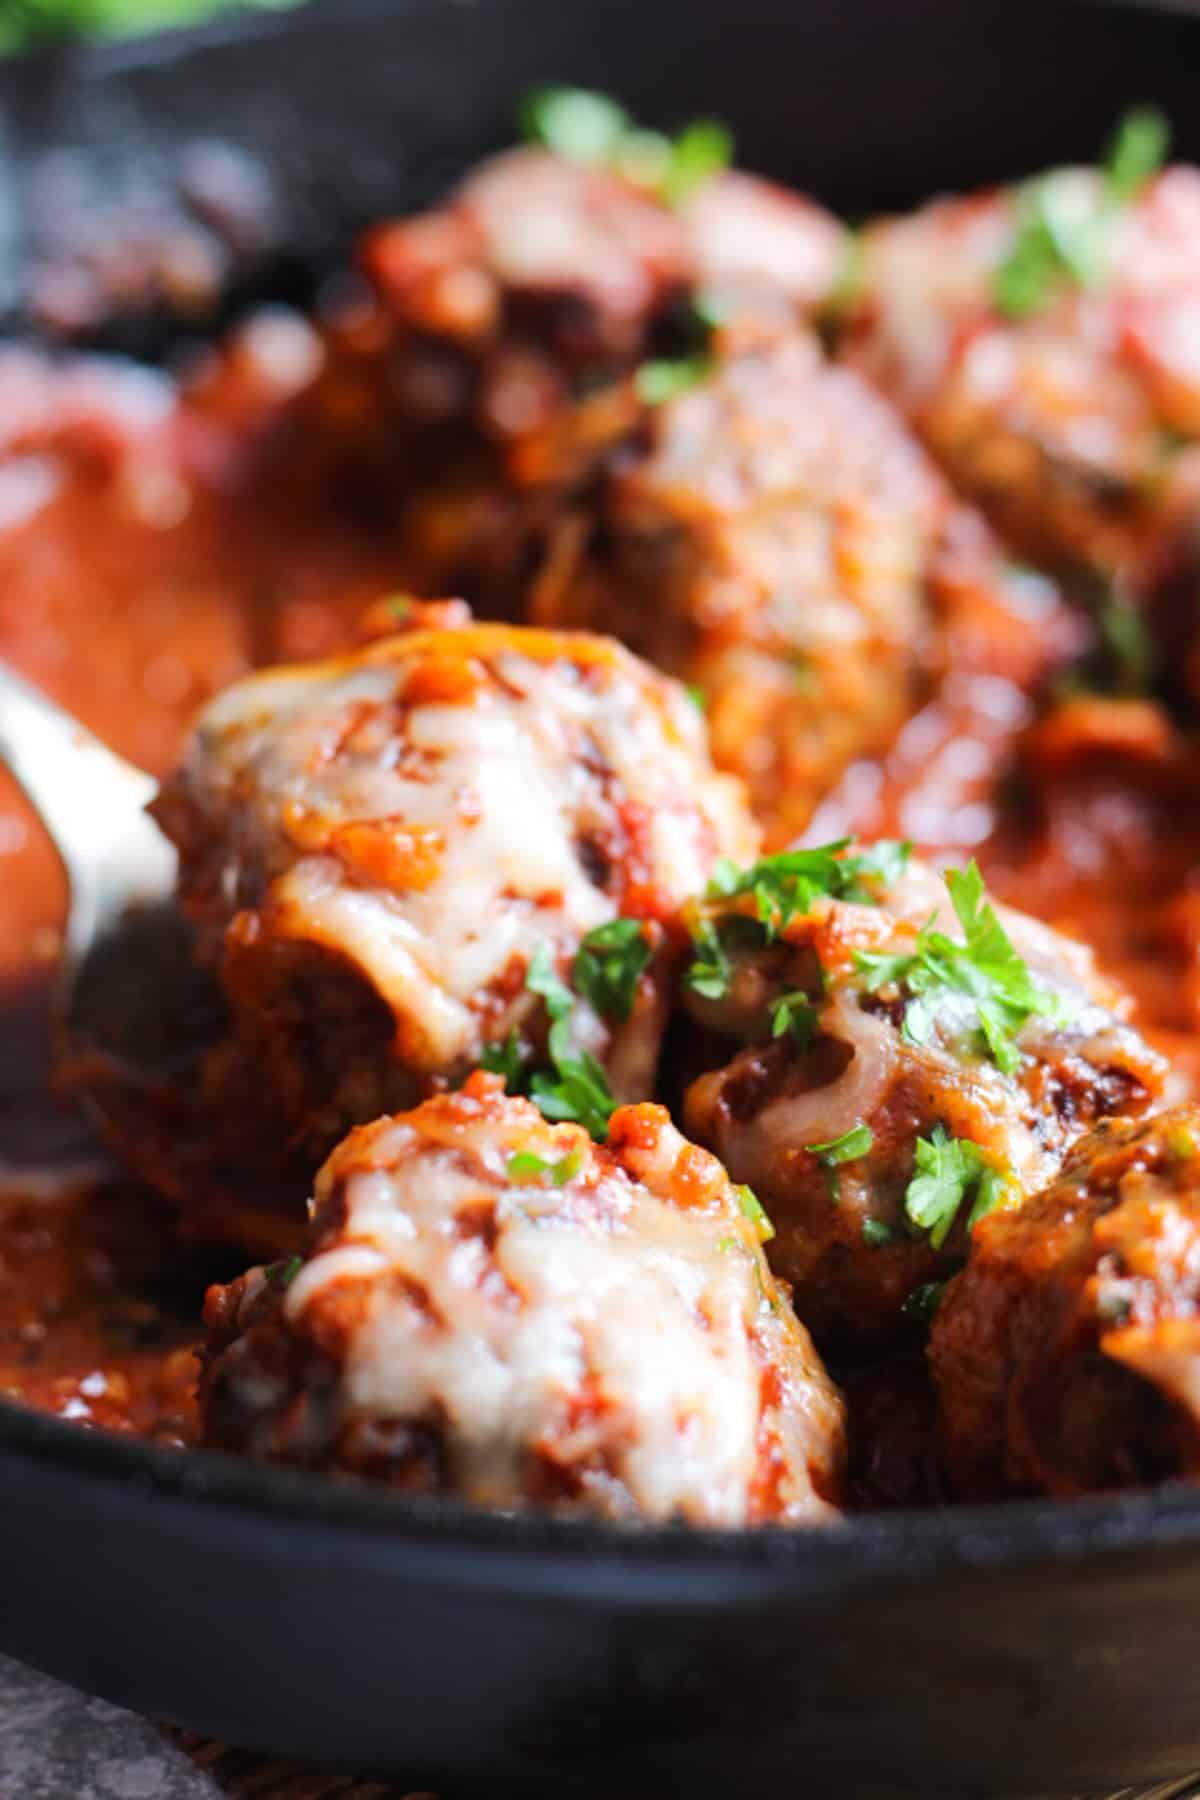 Meatballs topped with cheese and parsley. 